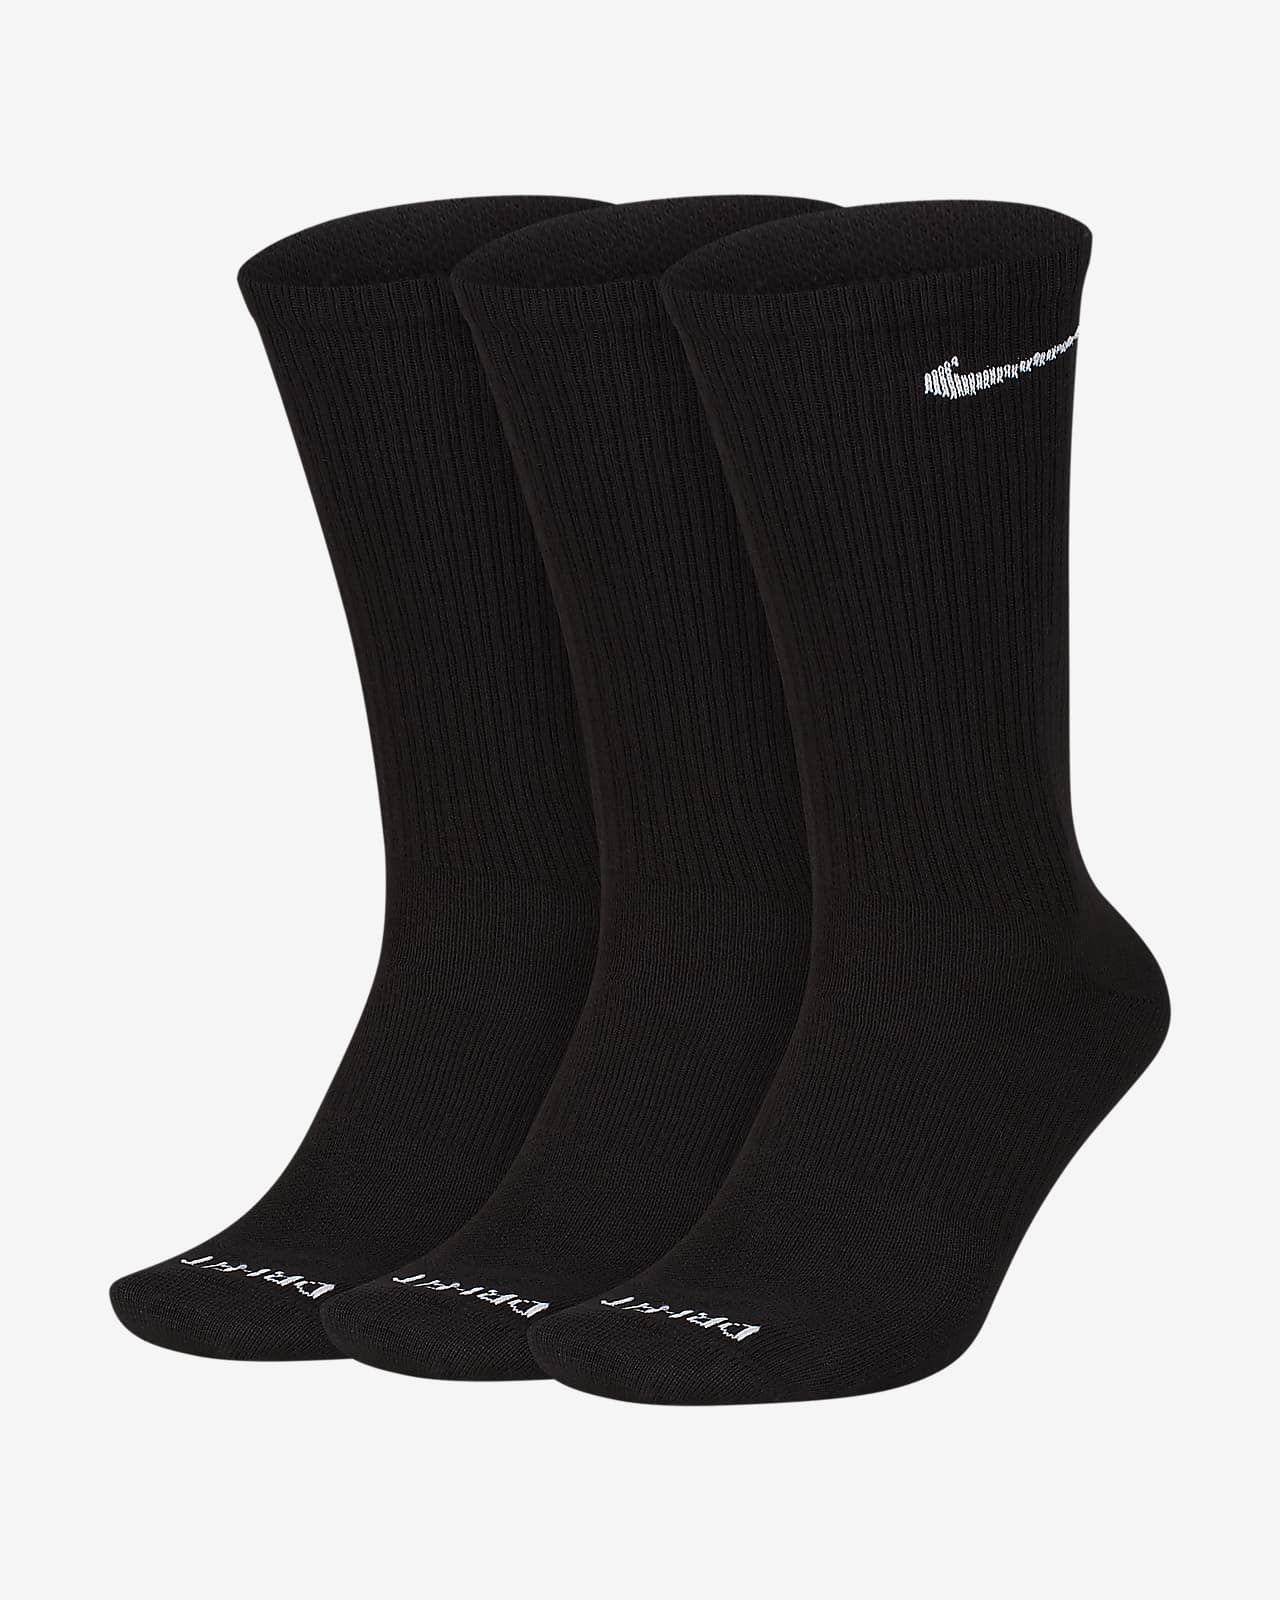 https://static.nike.com/a/images/t_PDP_1280_v1/f_auto,q_auto:eco/lfsd7hsbfbrnxo6nzwah/everyday-plus-lightweight-training-crew-socks-08t3F5.png